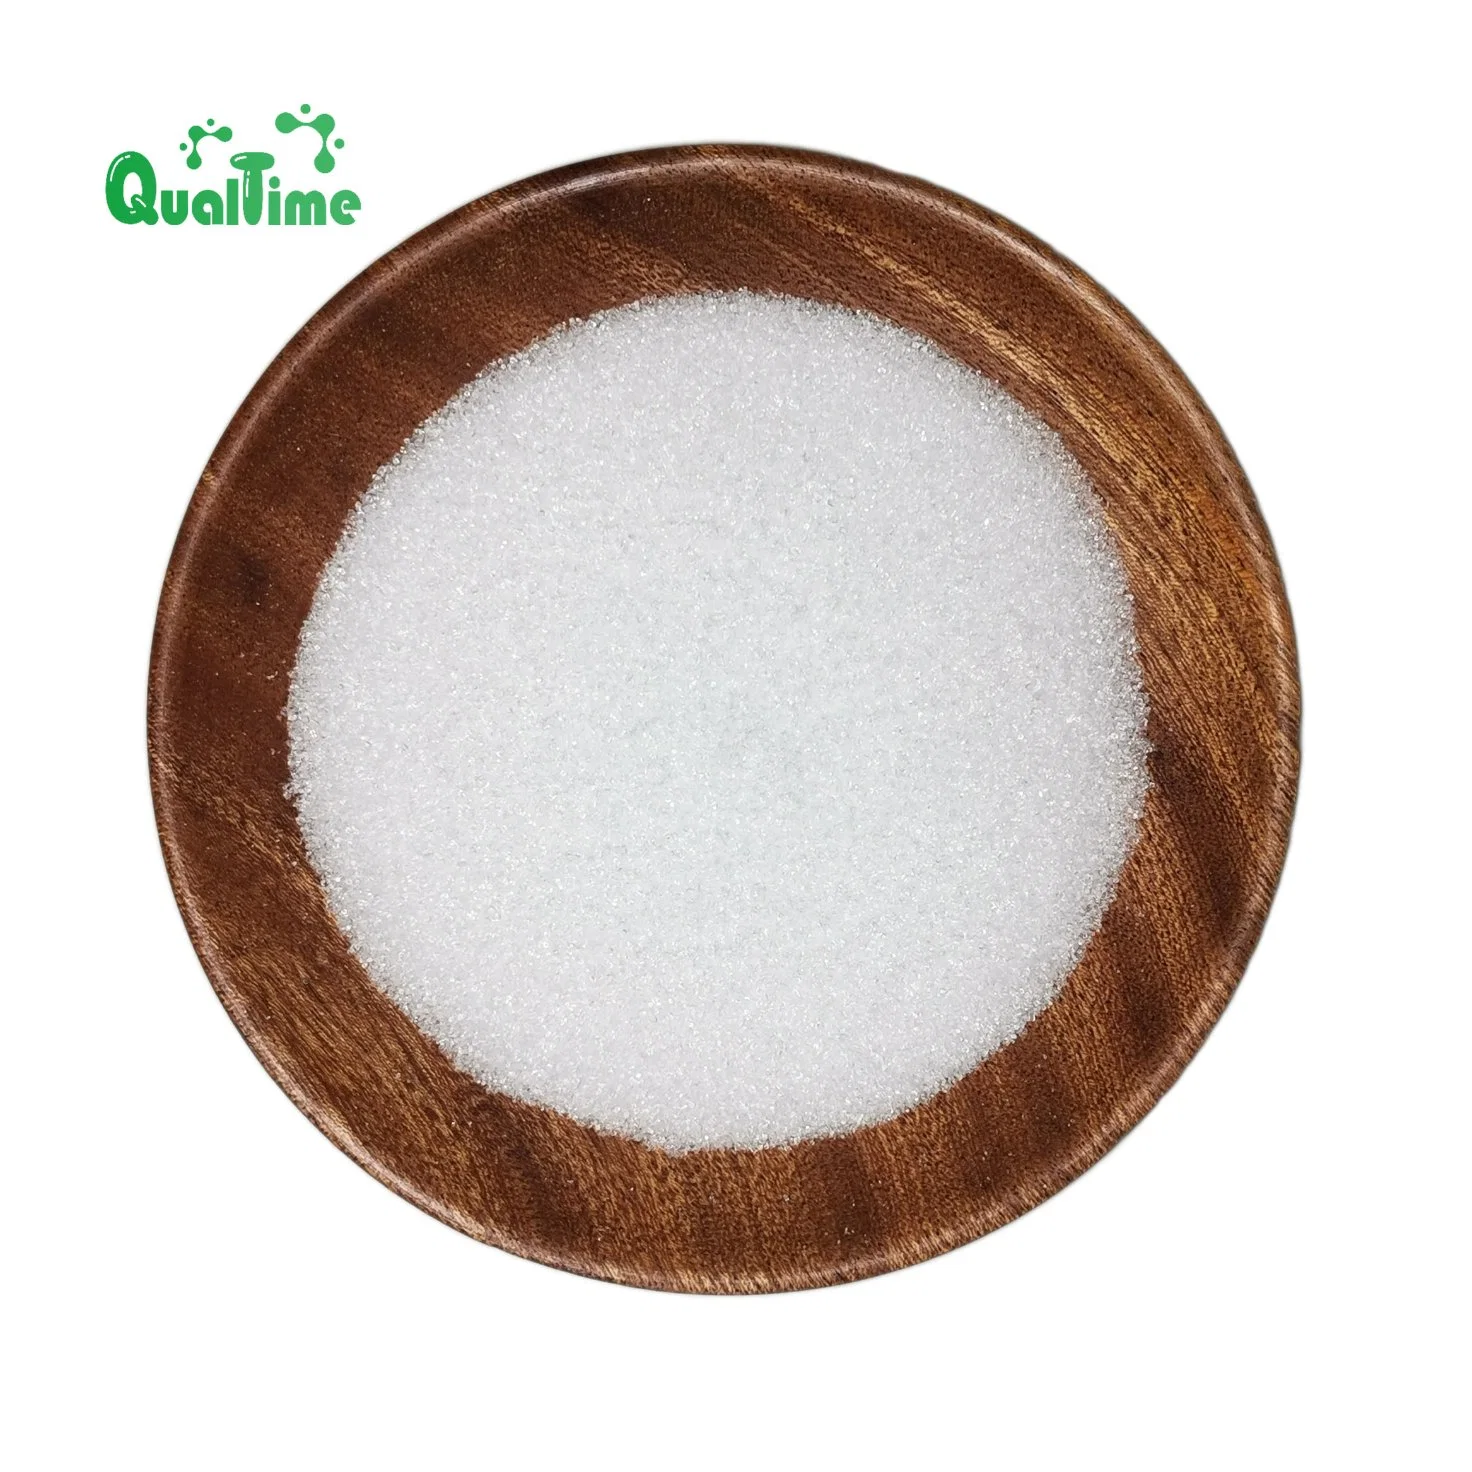 High Quality Sweetener Erythritol/Sorbitol/Xylitol/ Liquid Glucose/High Fructose Corn Syrup for Food and Beverage